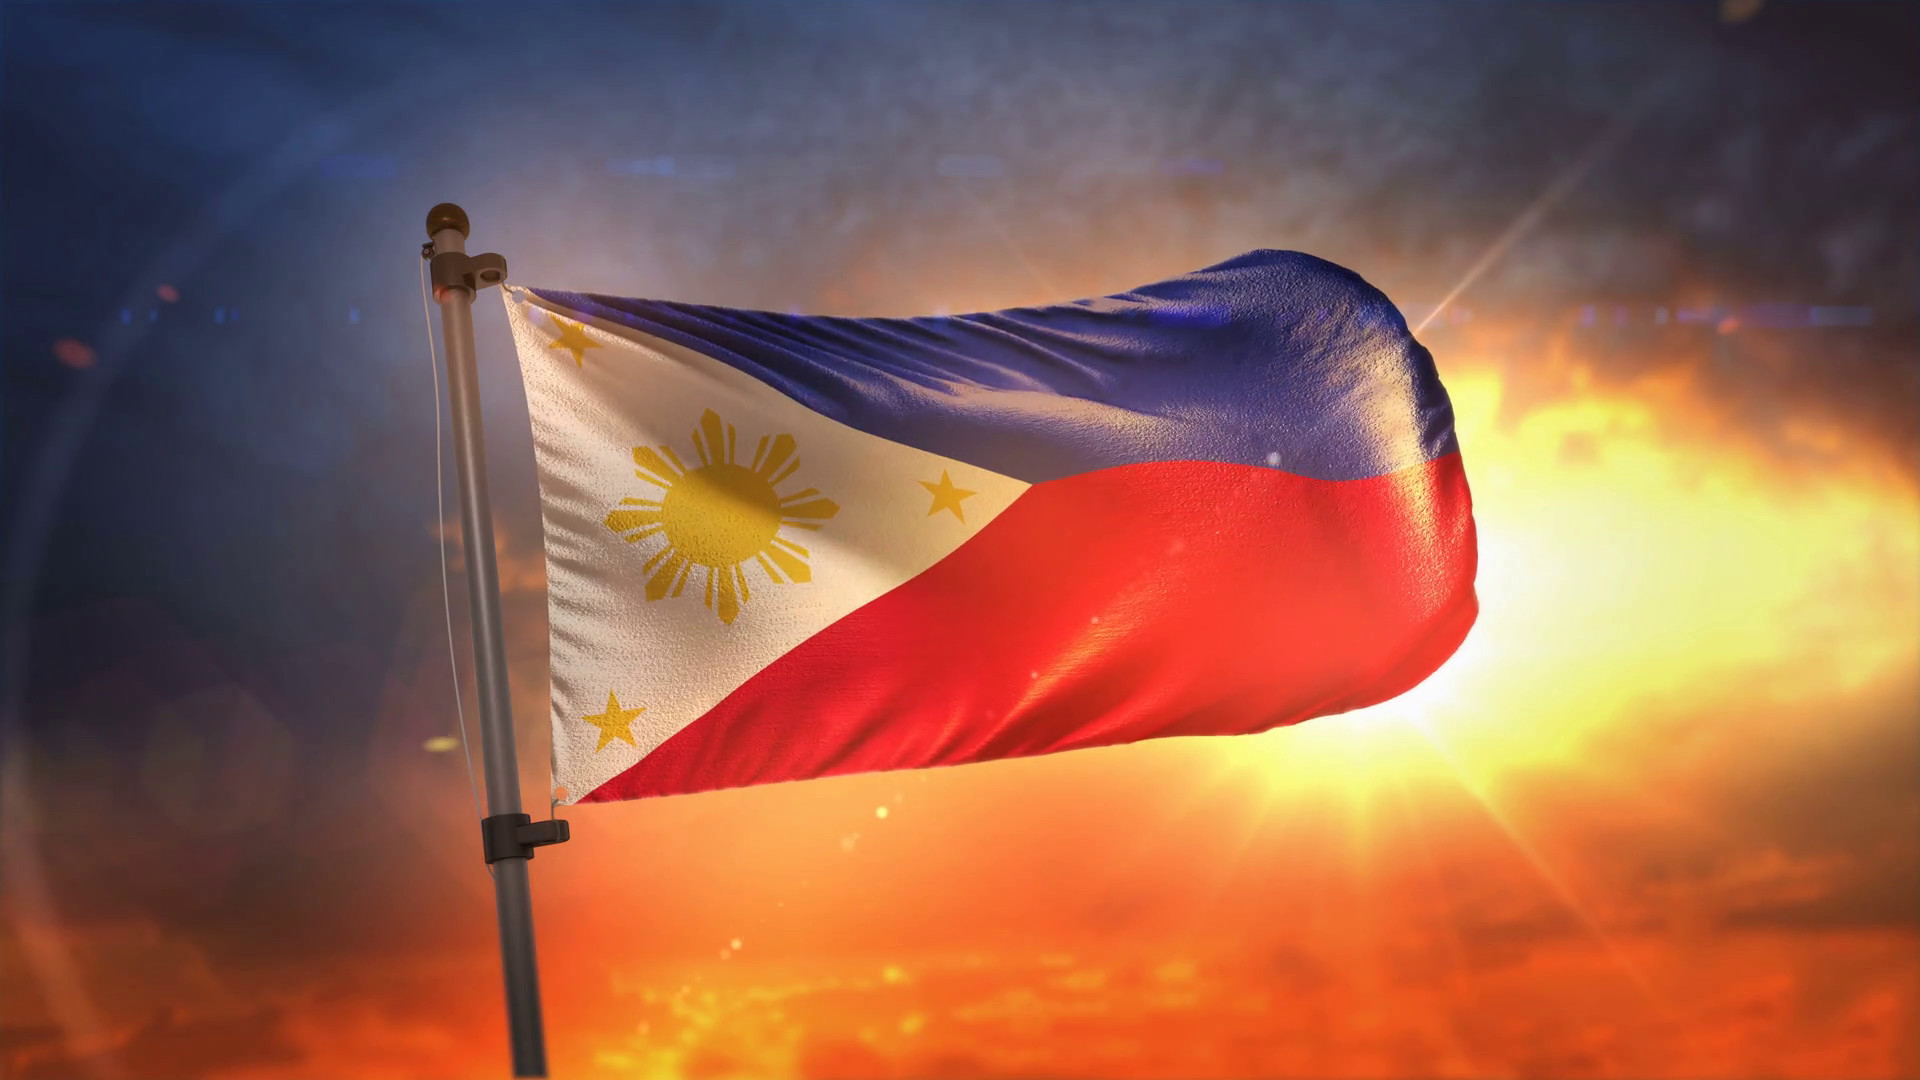 1920x1080 Subscription Library Philippines Flag Backlit At Beautiful Sunrise Loop  Slow Motion 4K